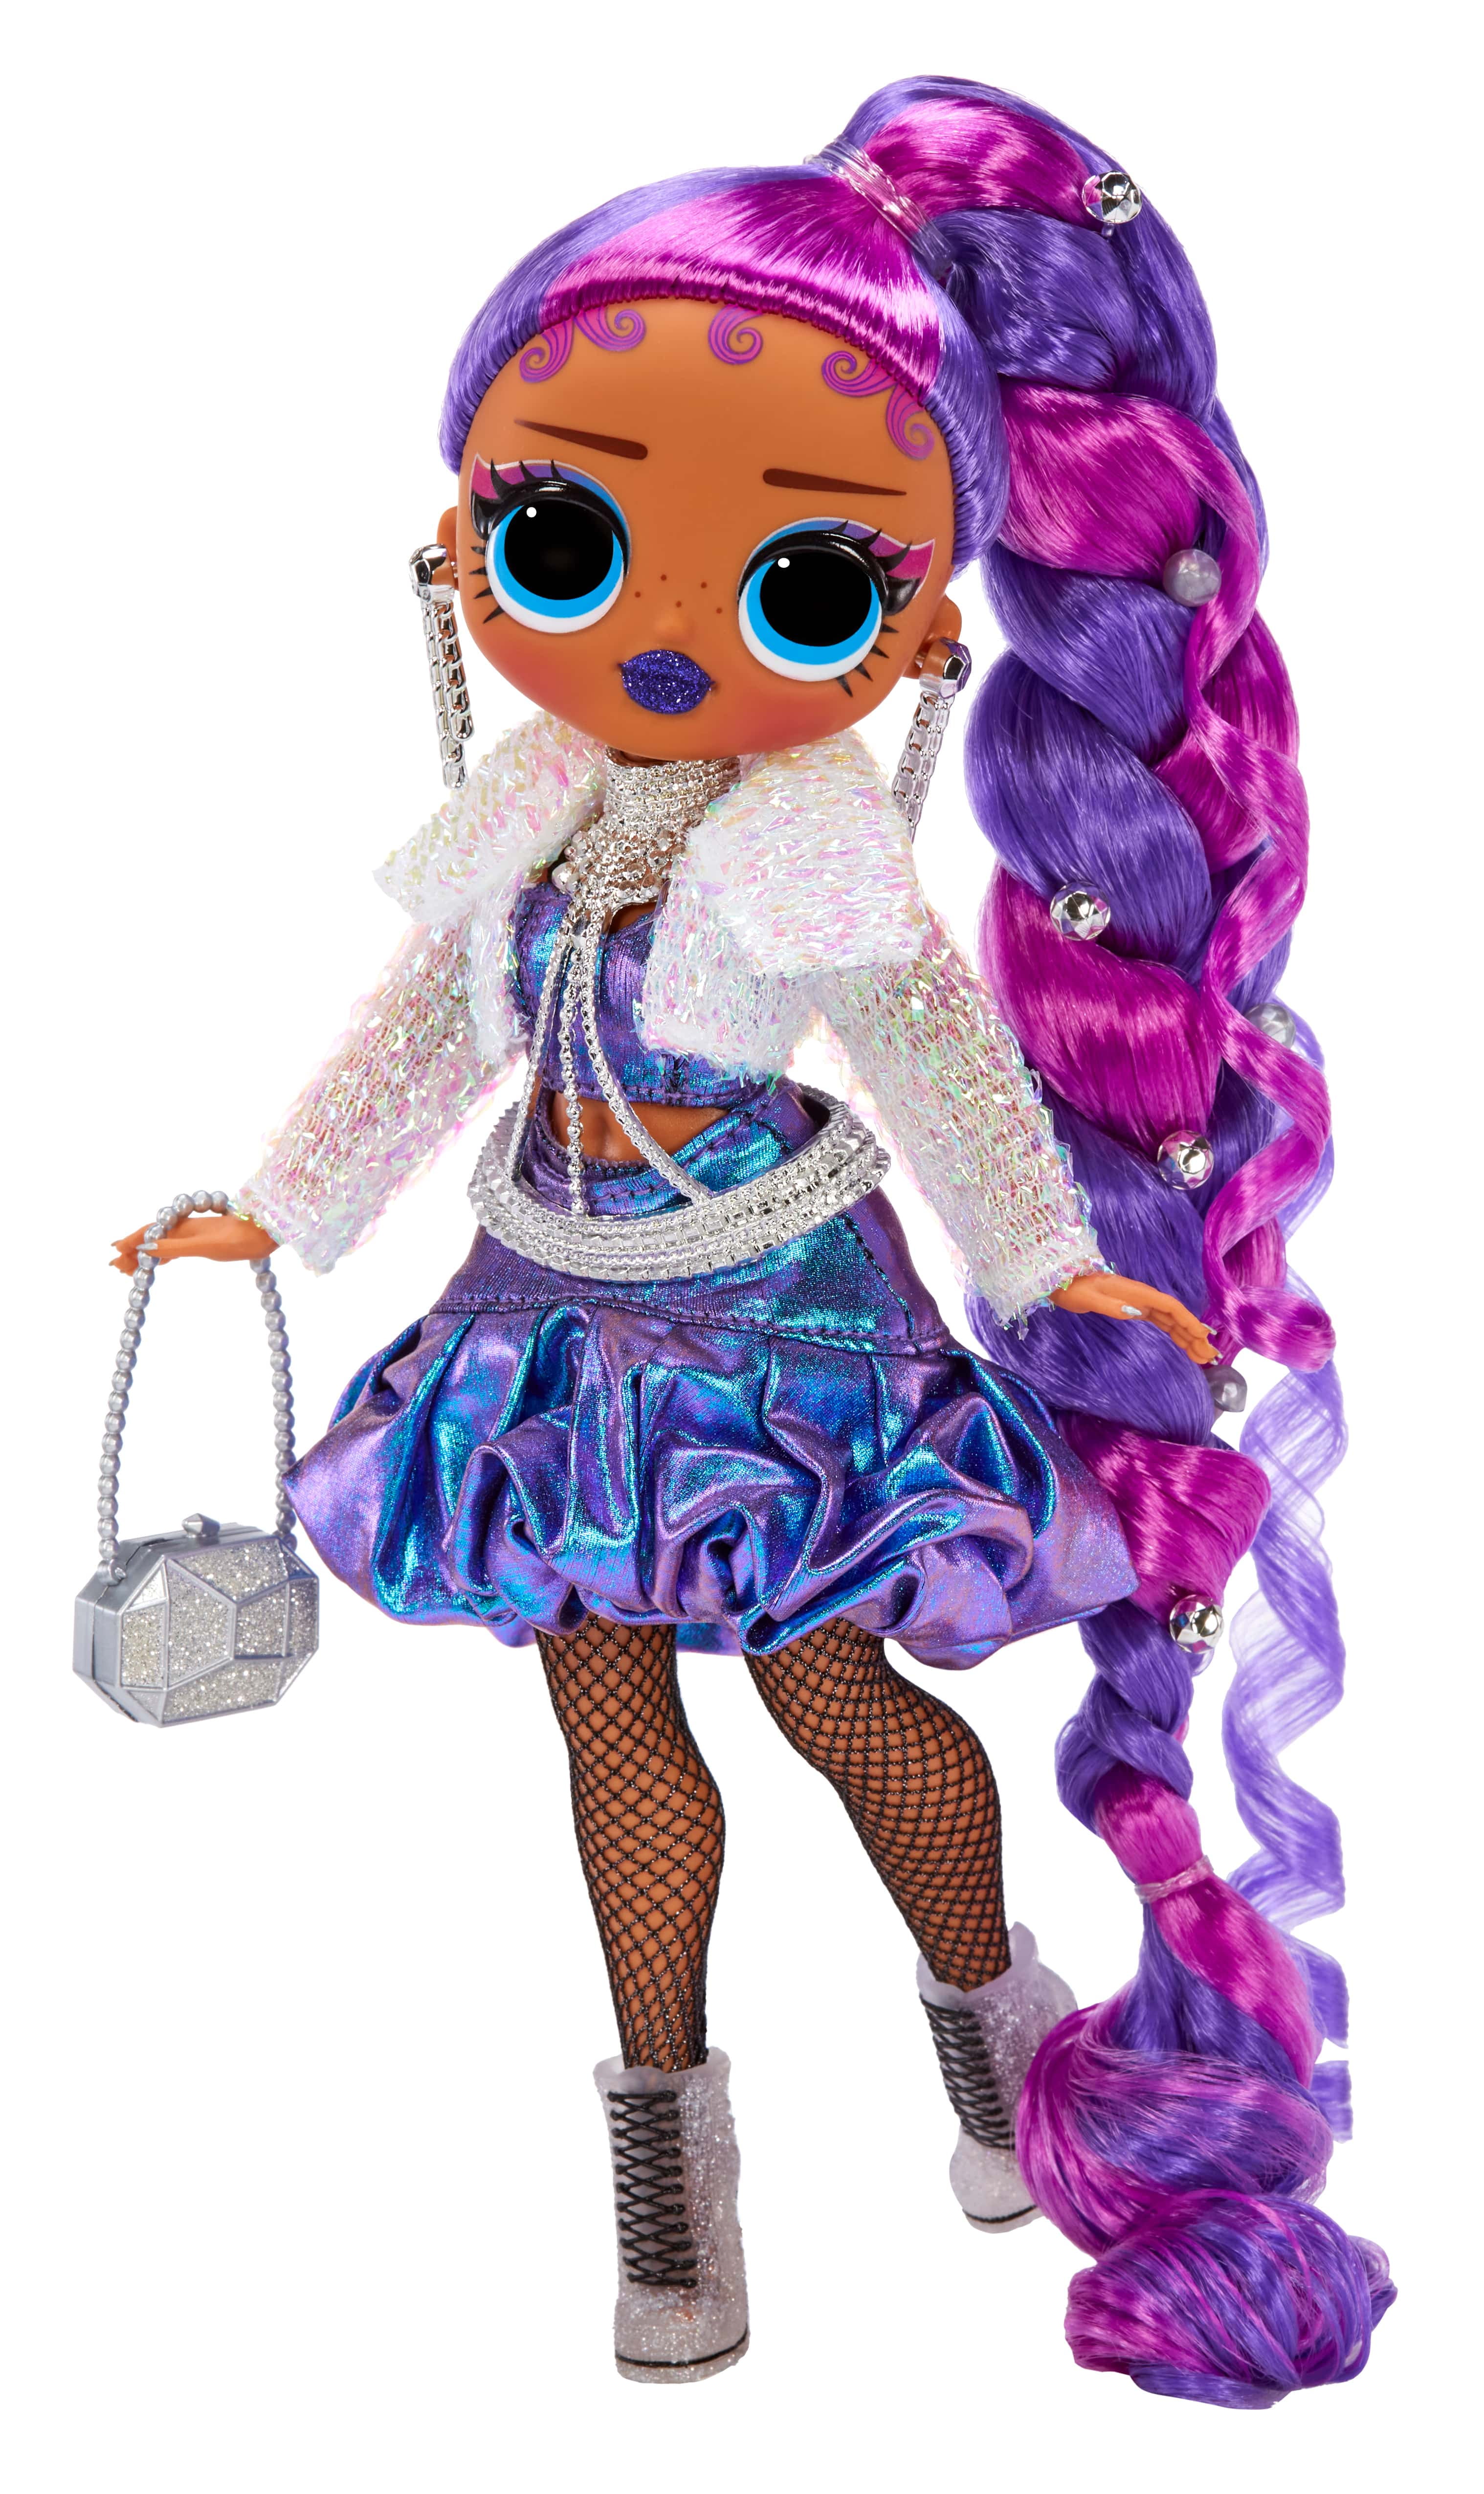 LOL Surprise OMG Queens Runway Diva fashion doll with 20 Surprises  Including Outfit and Accessories for Fashion Toy, Girls Ages 3 and up,  10-inch doll